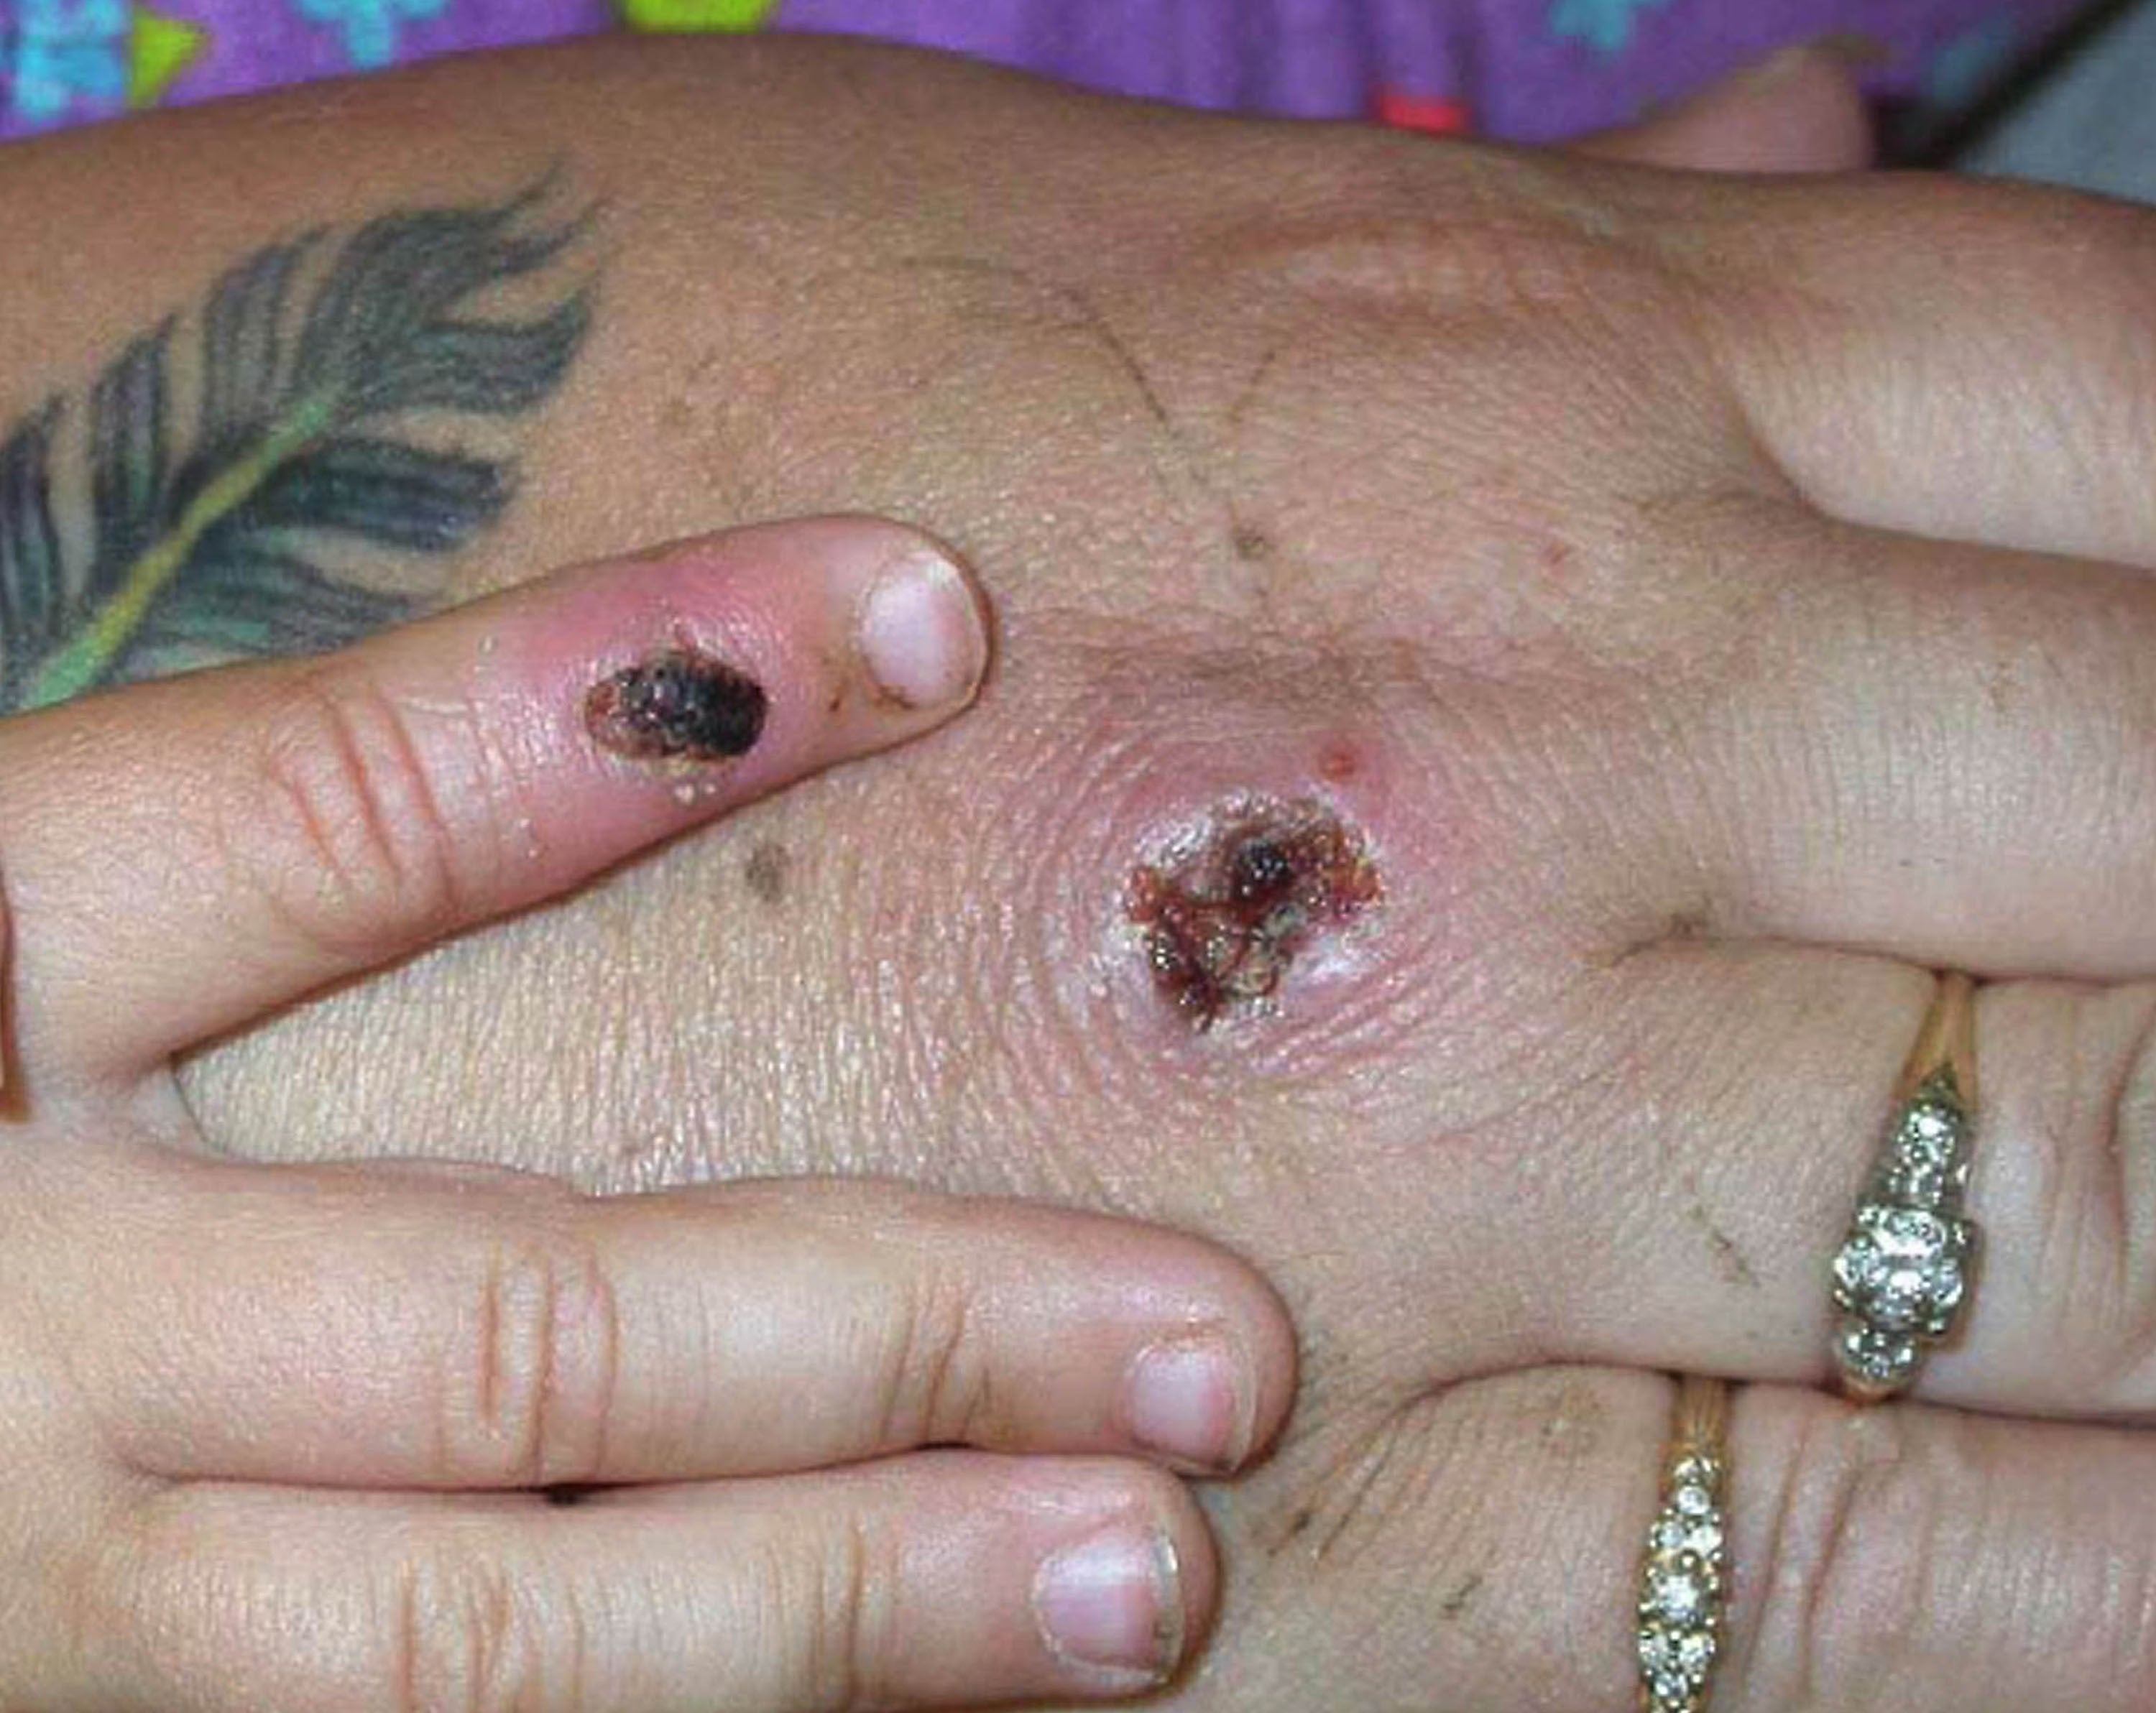 Symptoms of one of the first known cases of the monkeypox virus are shown on a patient’s hand in 2003